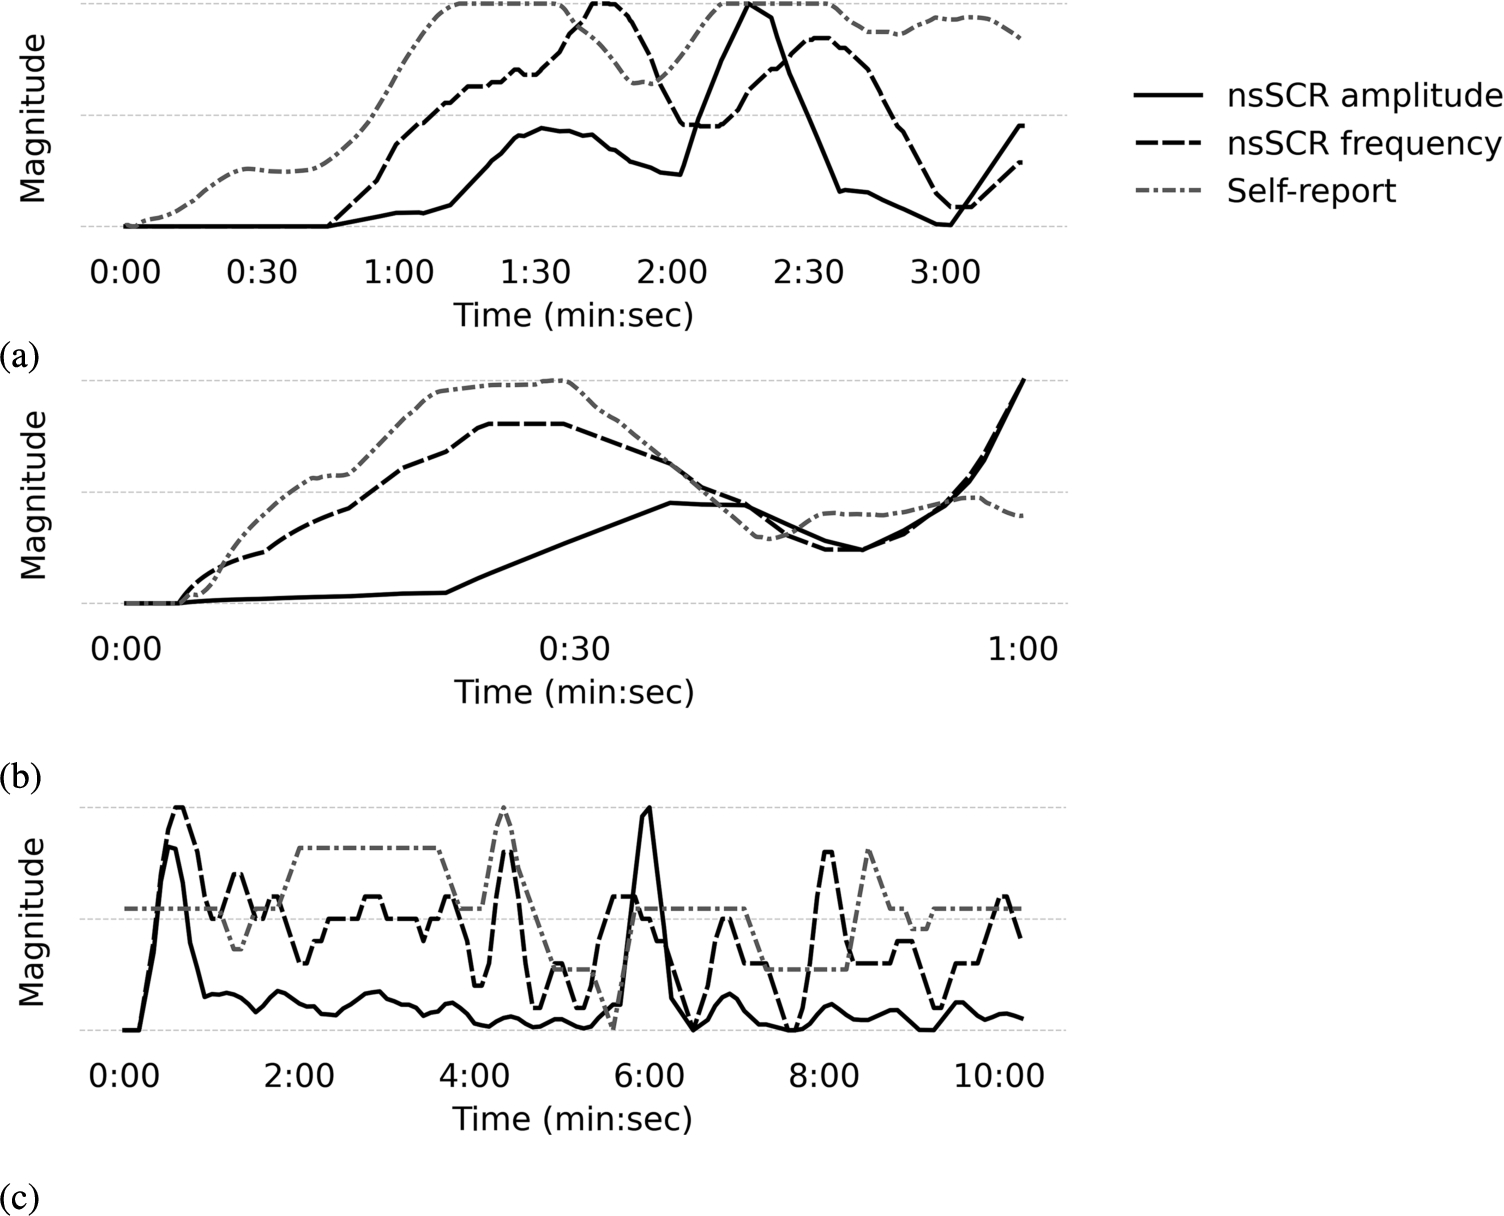 Example of the processed self-reported arousal against the processed ‘non-specific’ Skin Conductance Response’s (nsSCR) frequency and amplitude, given over the duration of one video with a high arousal context, extracted from the (A) CASE, (B) CEAP-360VR, and (C) K-EmoCon dataset.